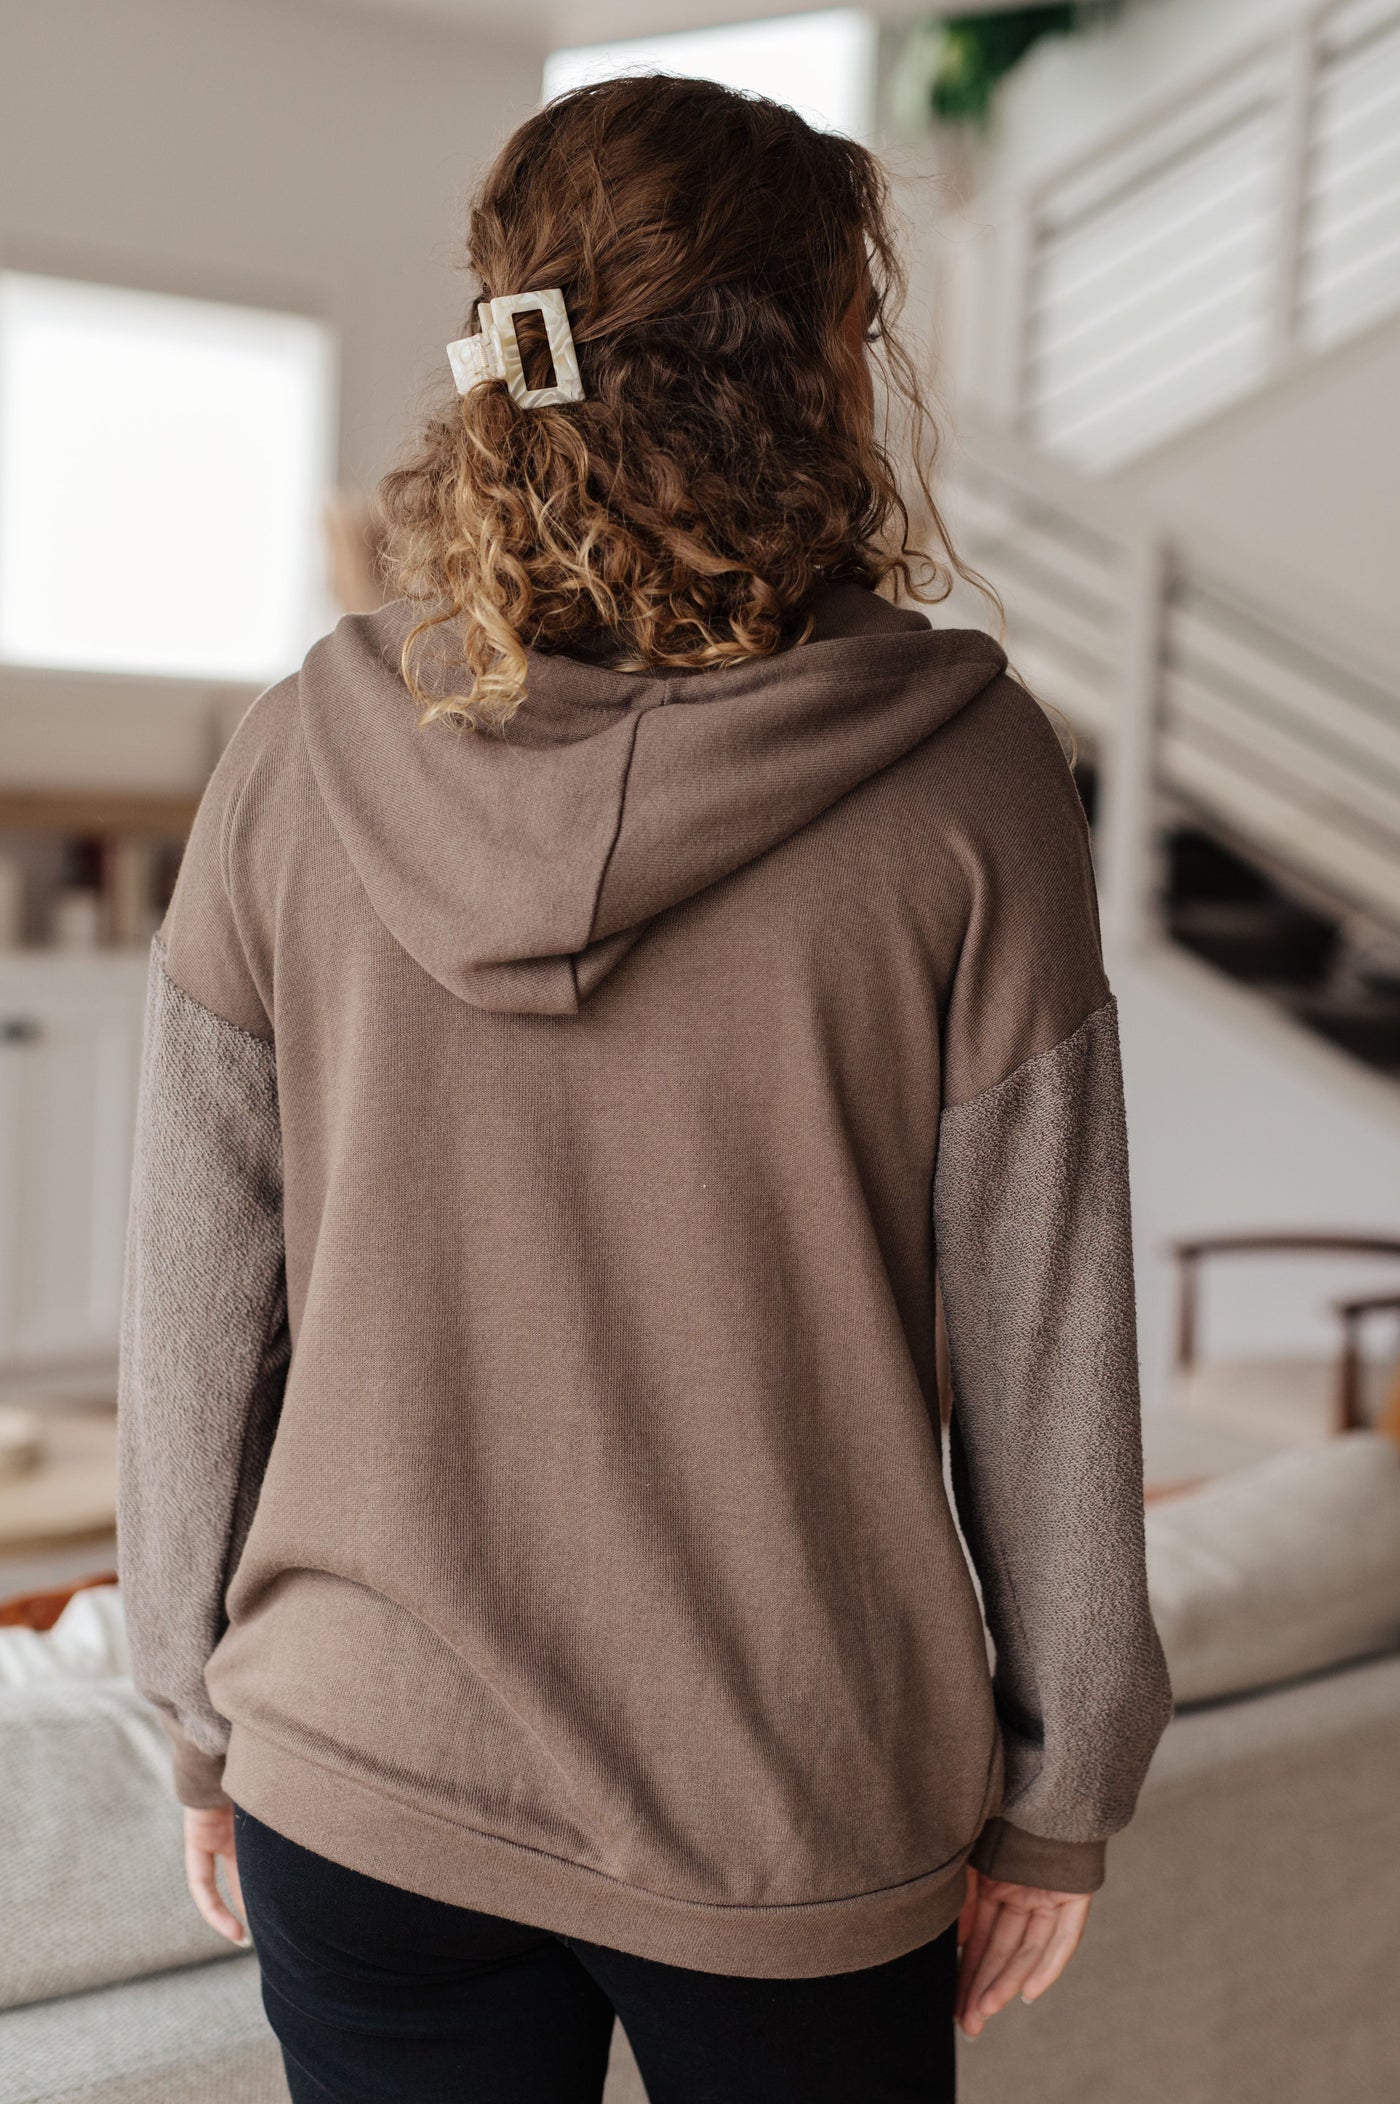 Stay warm and stylish with the On And On Zip Up Hoodie